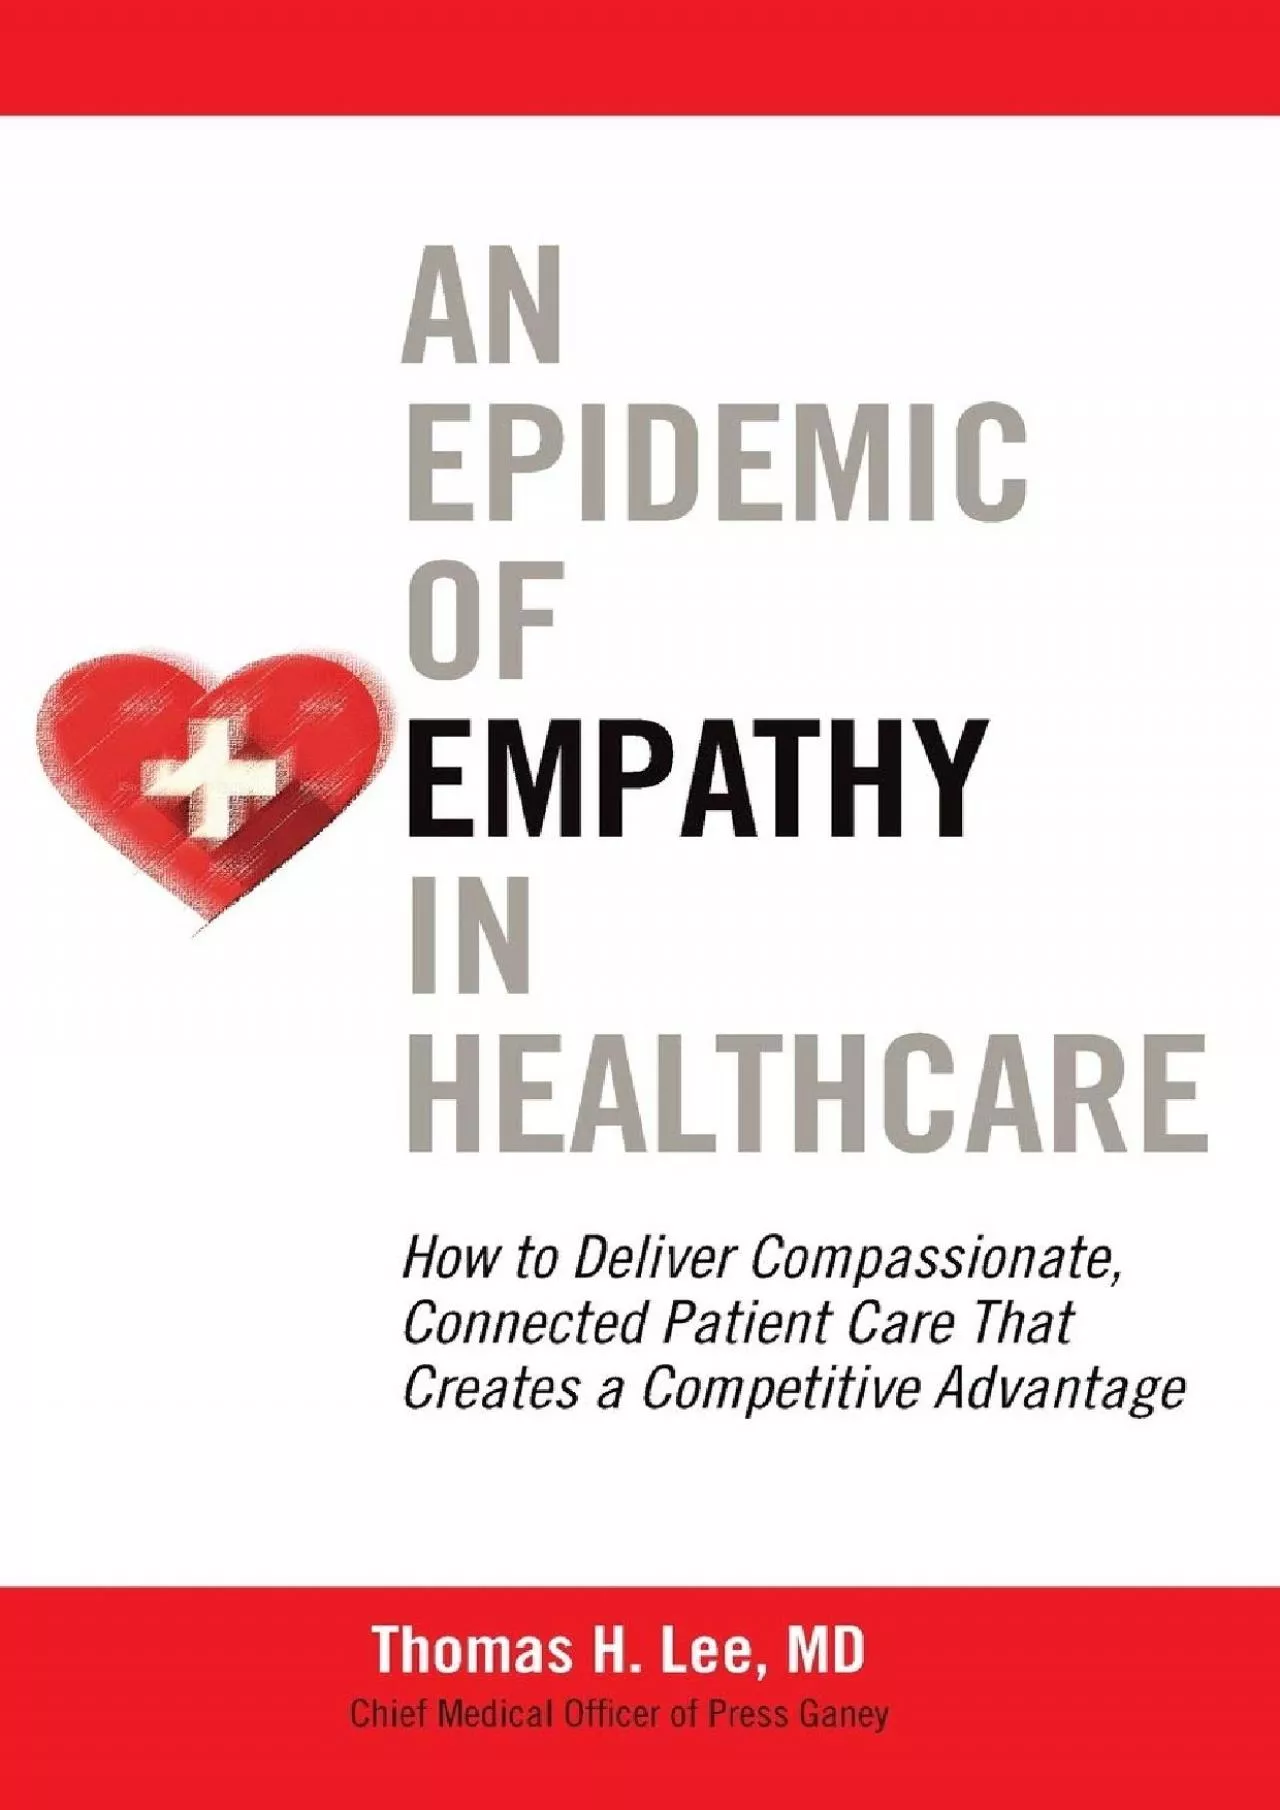 (EBOOK)-An Epidemic of Empathy in Healthcare: How to Deliver Compassionate, Connected